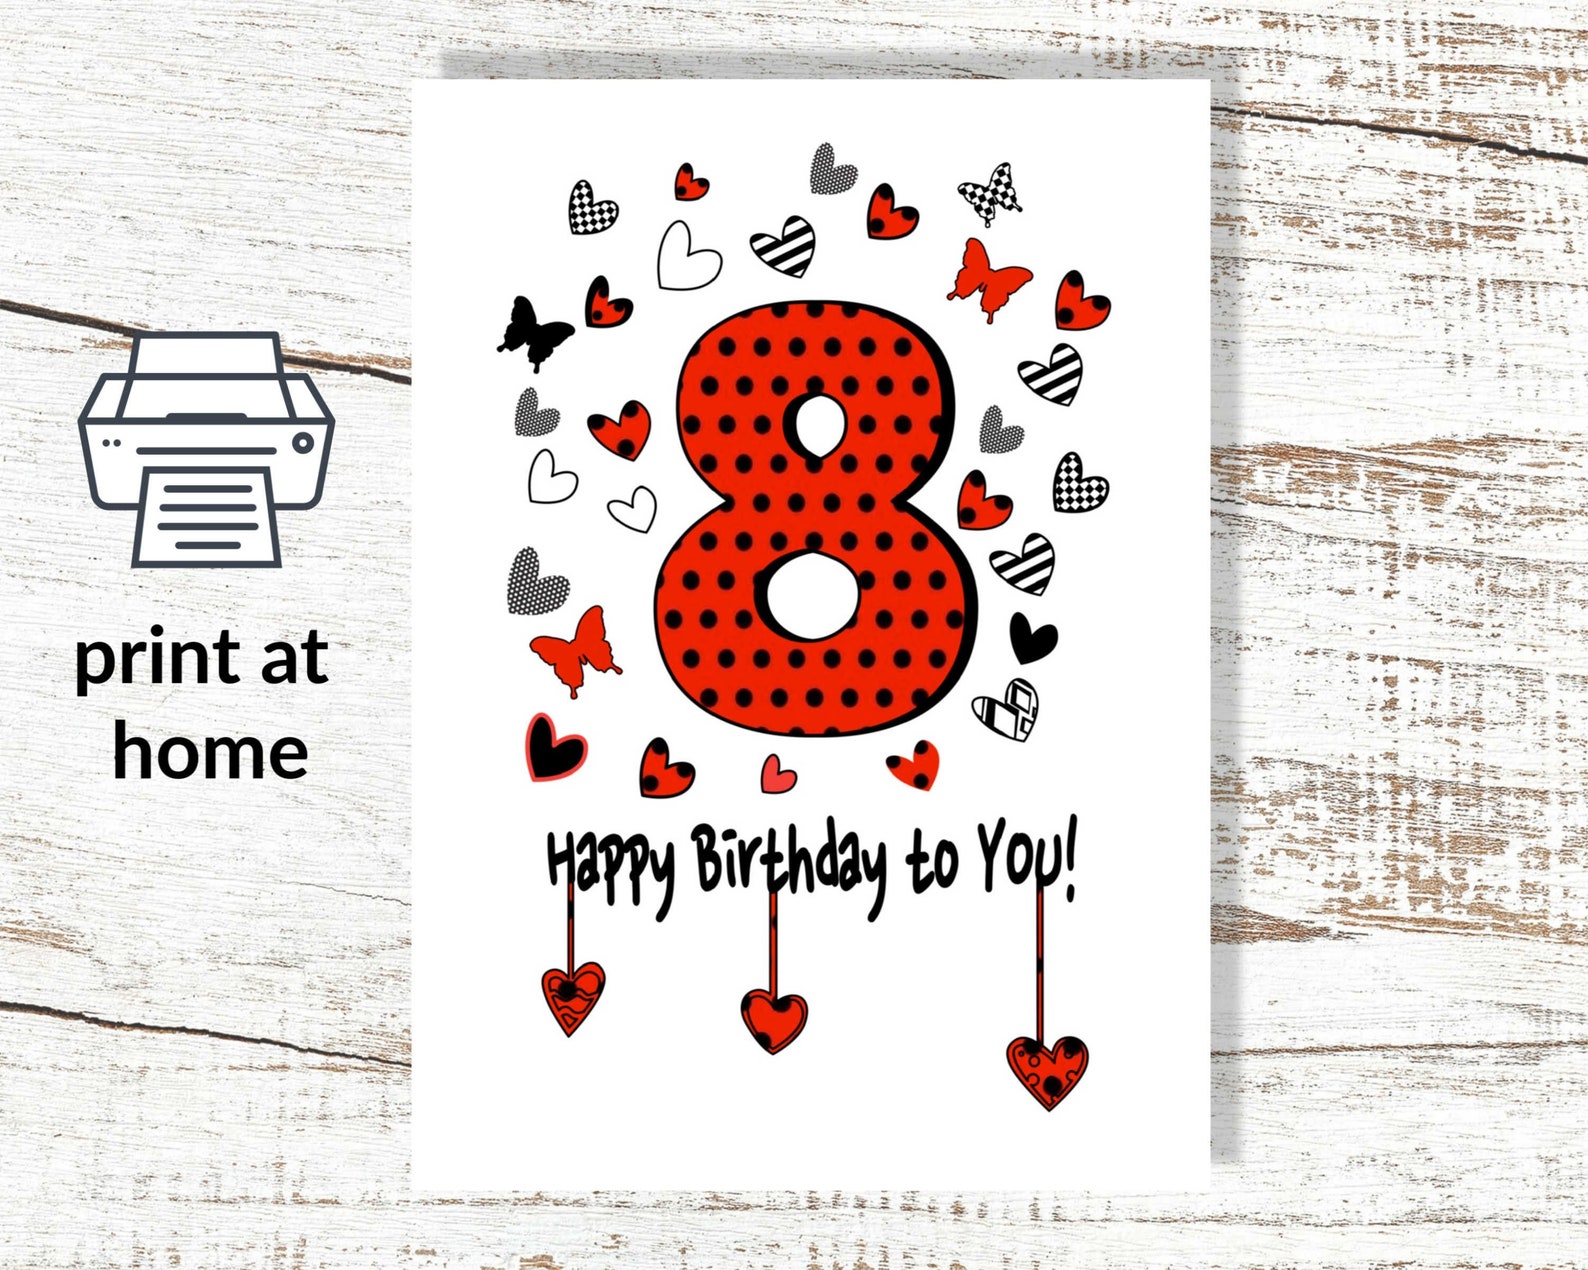 Instant Download And Print At Home 8th Birthday Greeting Card